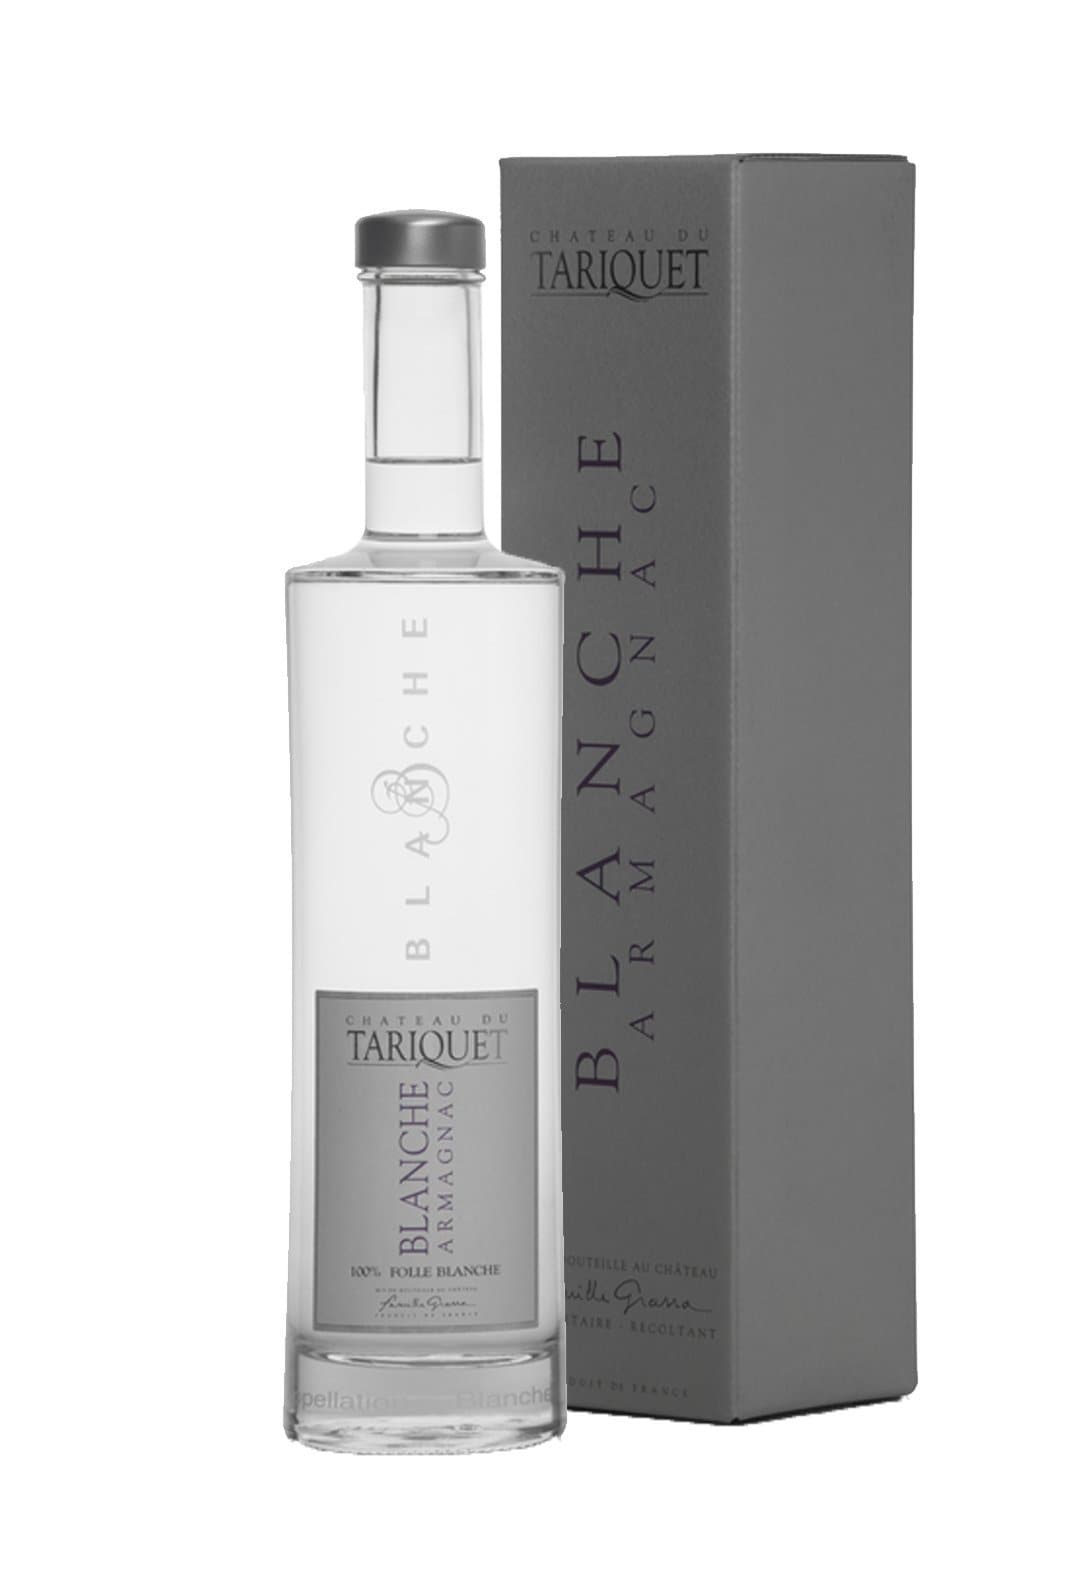 Domaine Tariquet Armagnac non-aged Folle Blanche 46% 700ml | Brandy | Shop online at Spirits of France